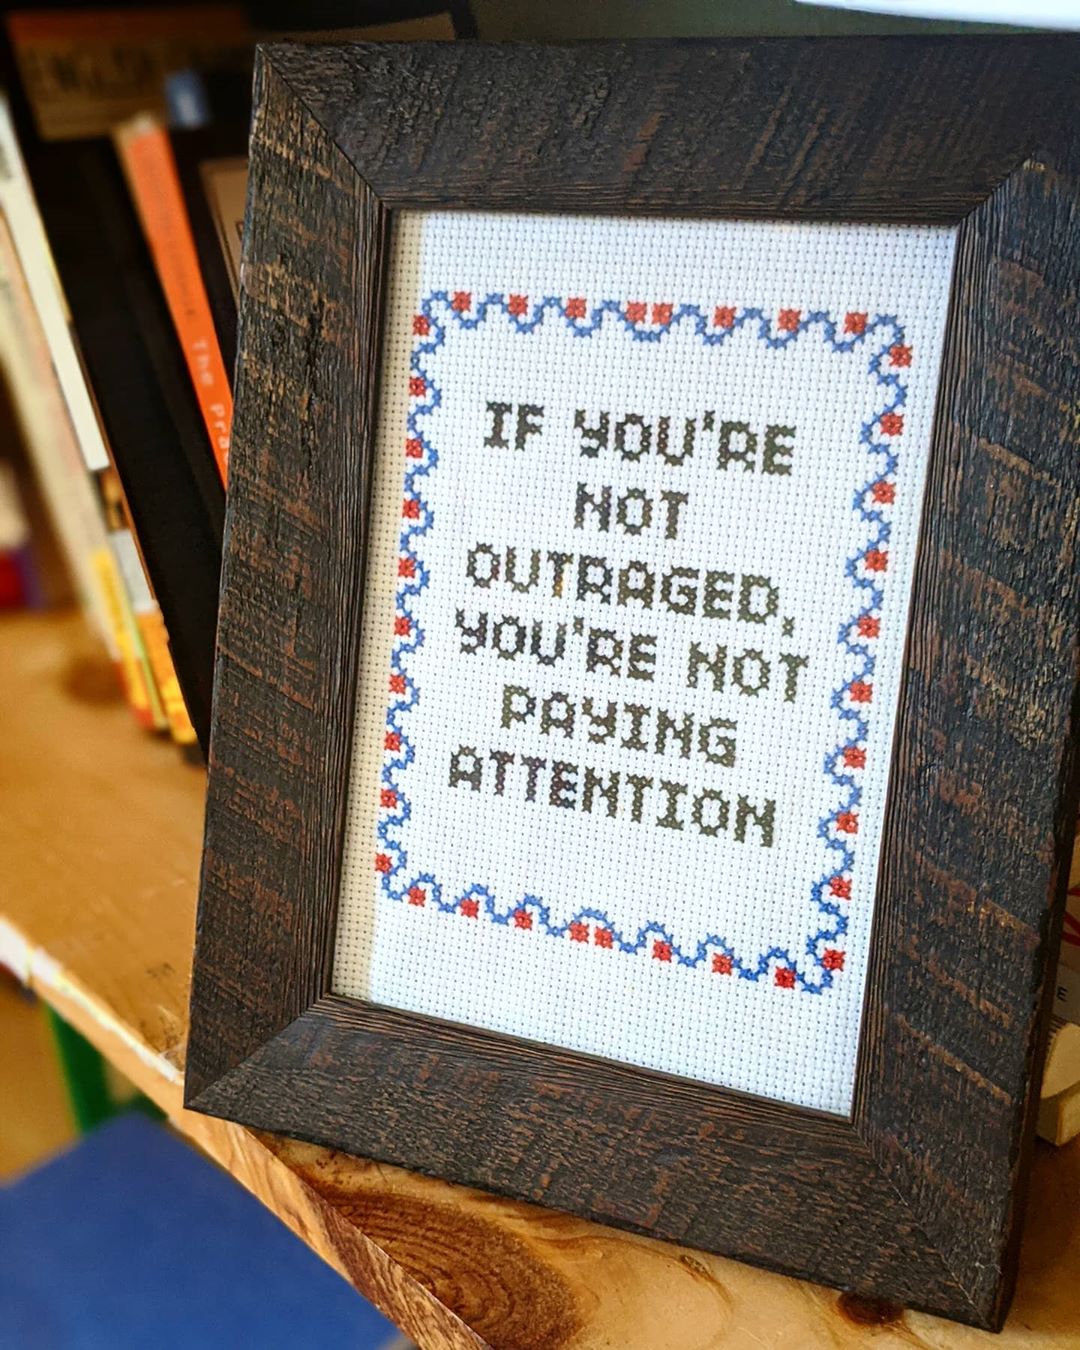 A framed embroidery of the quote 'If you're not outraged, you’re not paying attention'